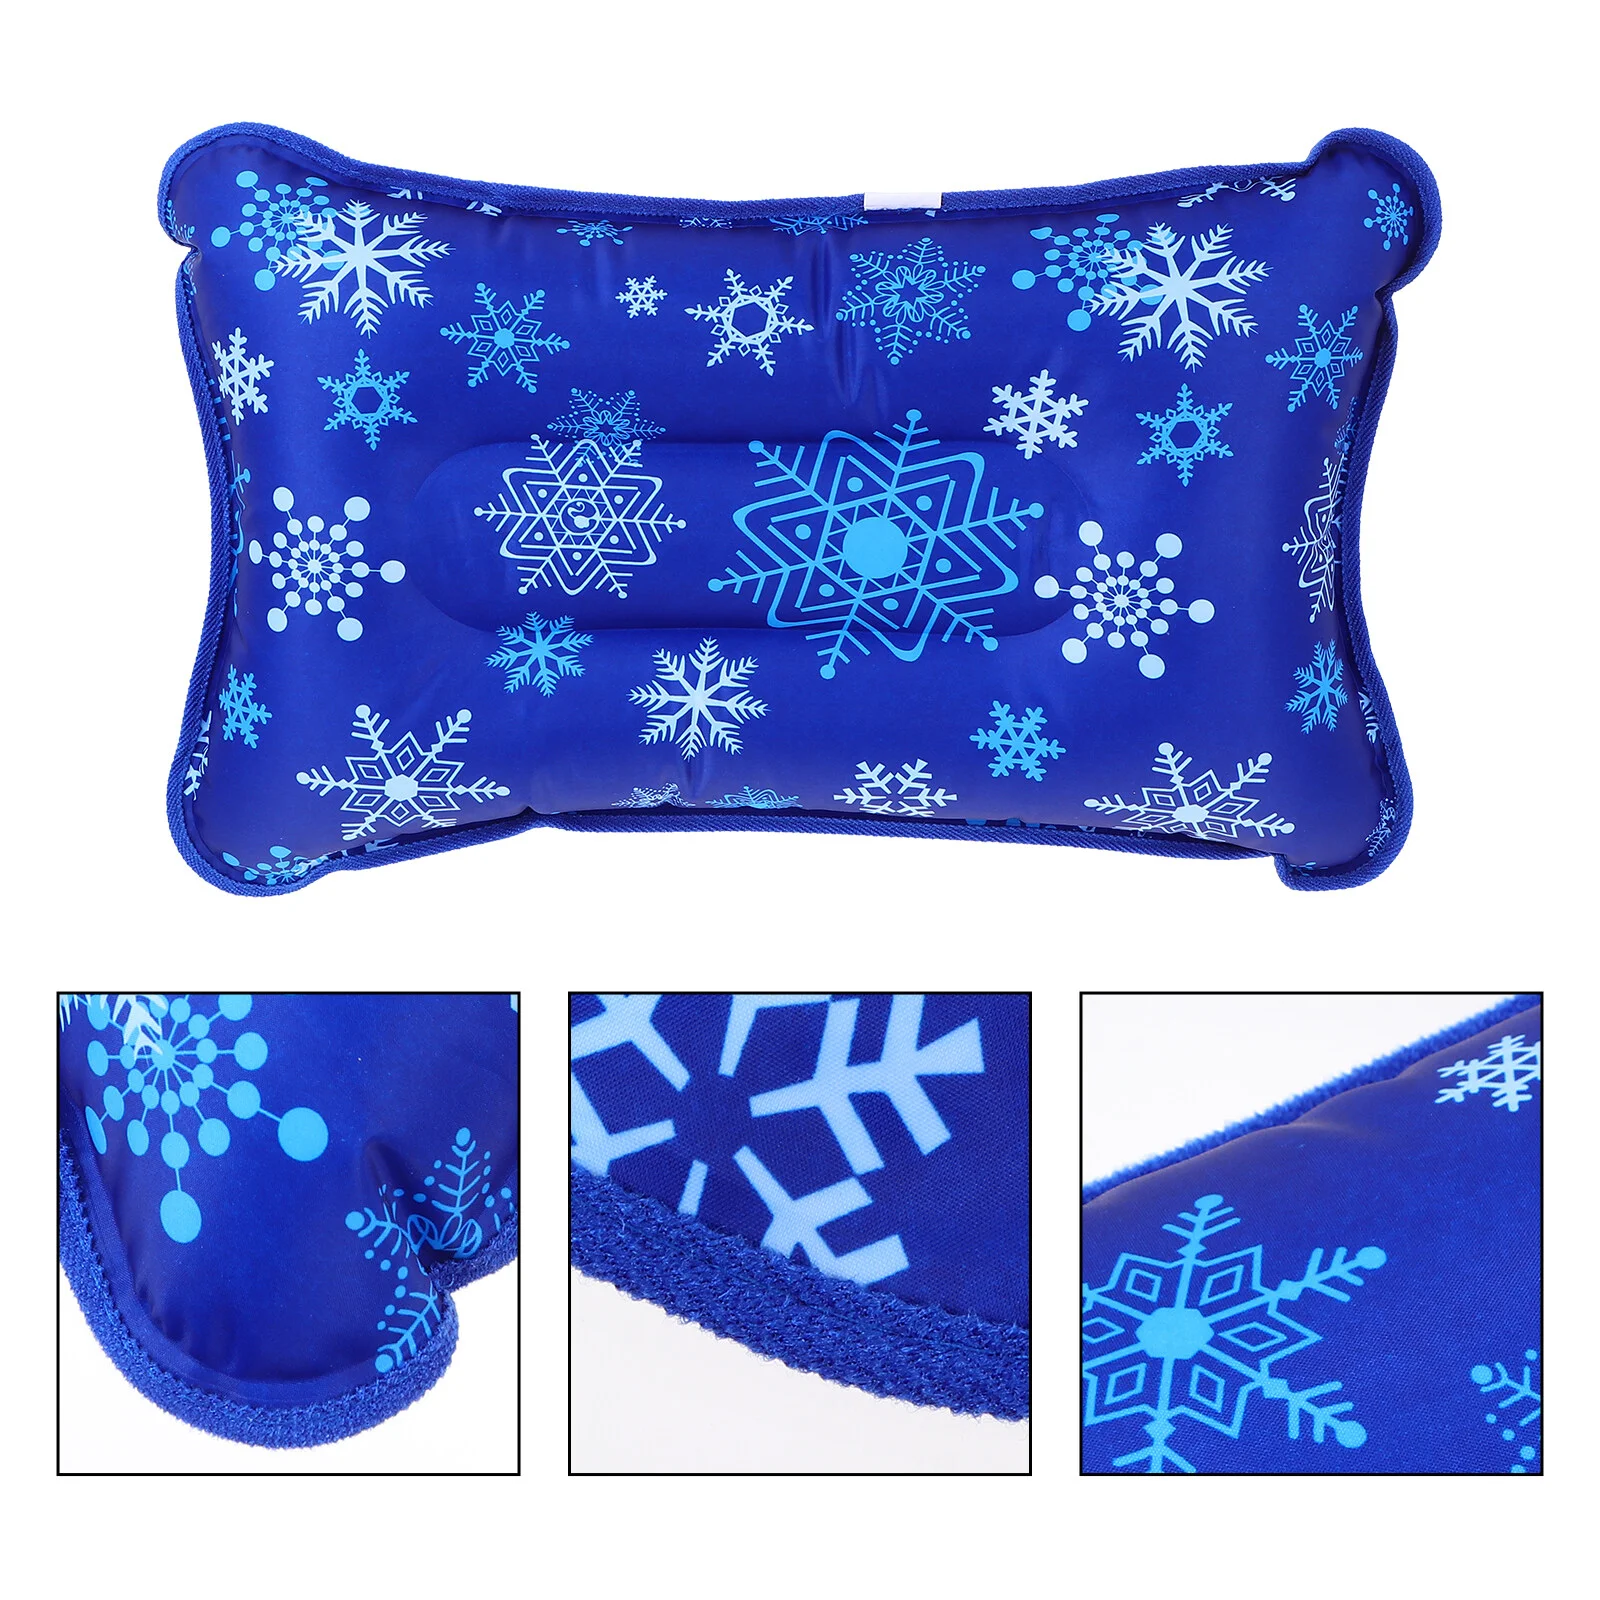 

Ice Pillow Water Seat Cushion Baby Durable Water-proof Practical Inflatable Nap